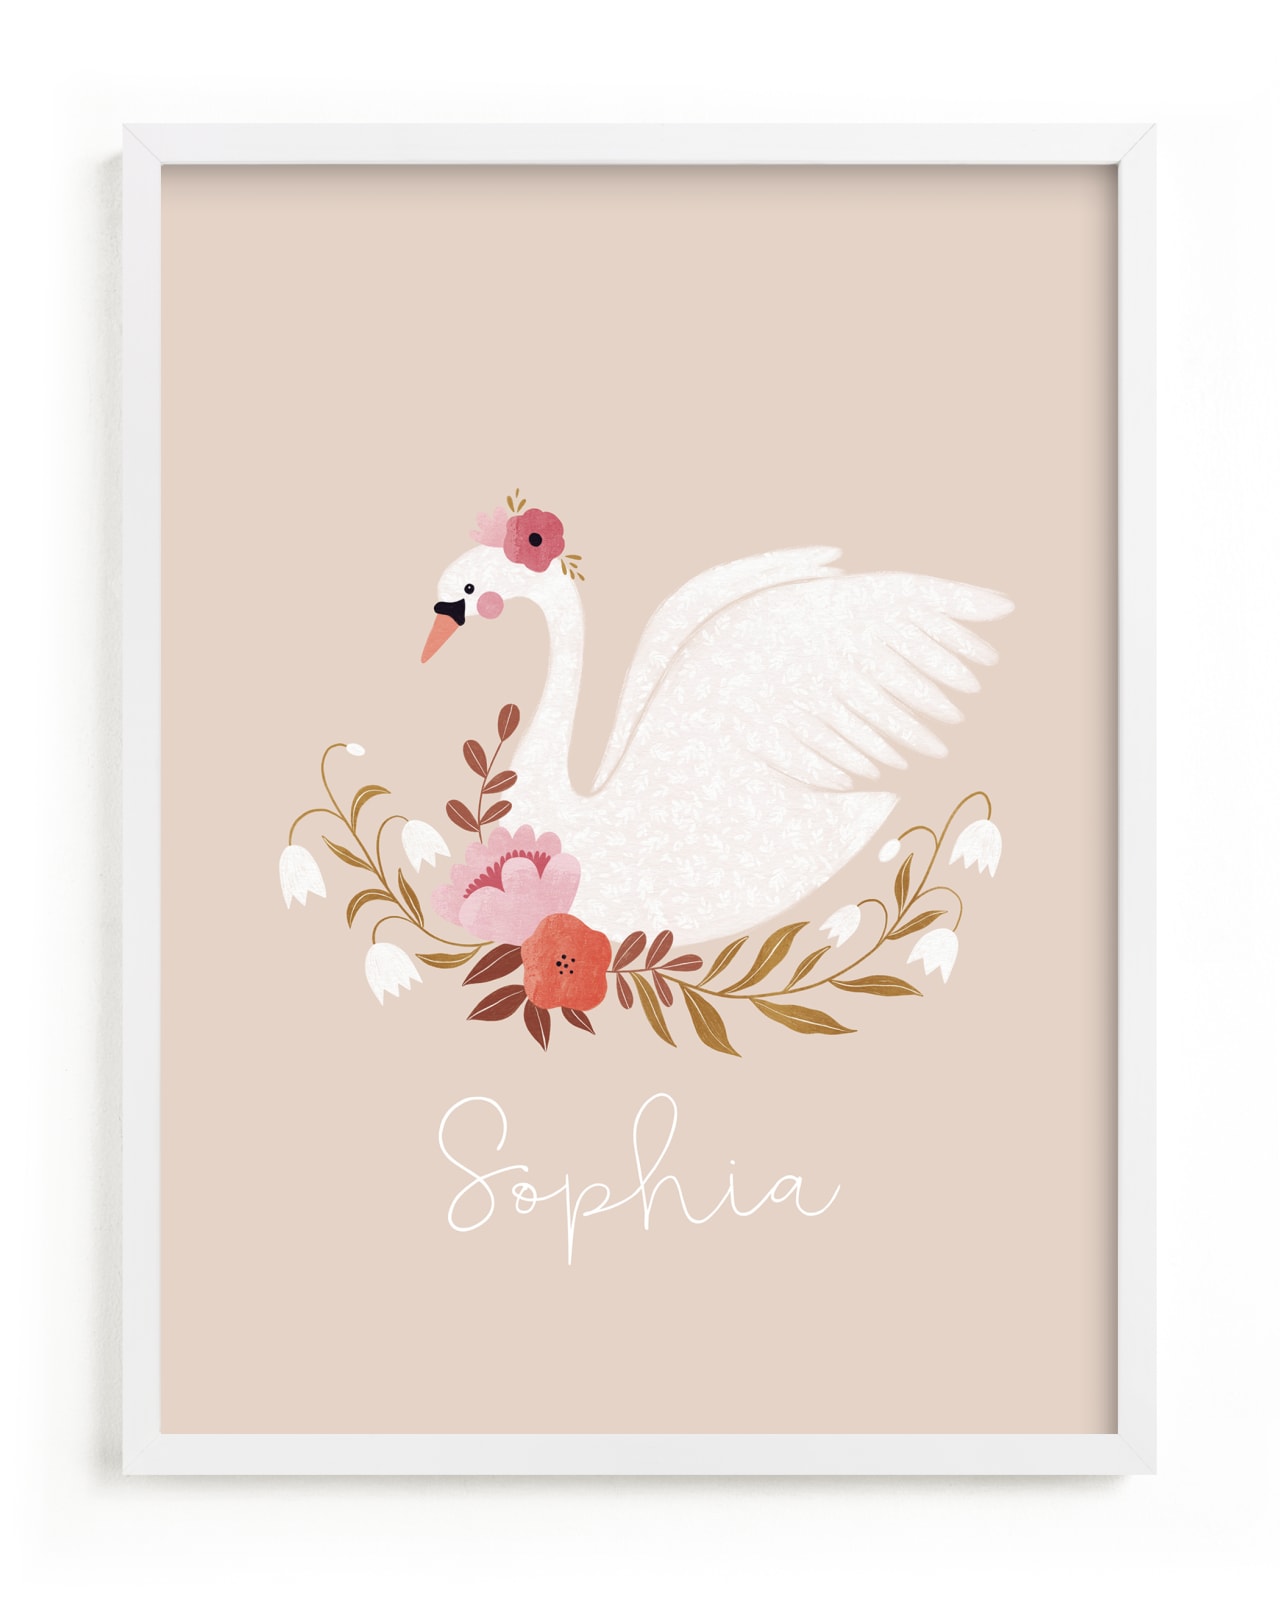 This is a pink nursery wall art by Tati Abaurre called Romantic swan.